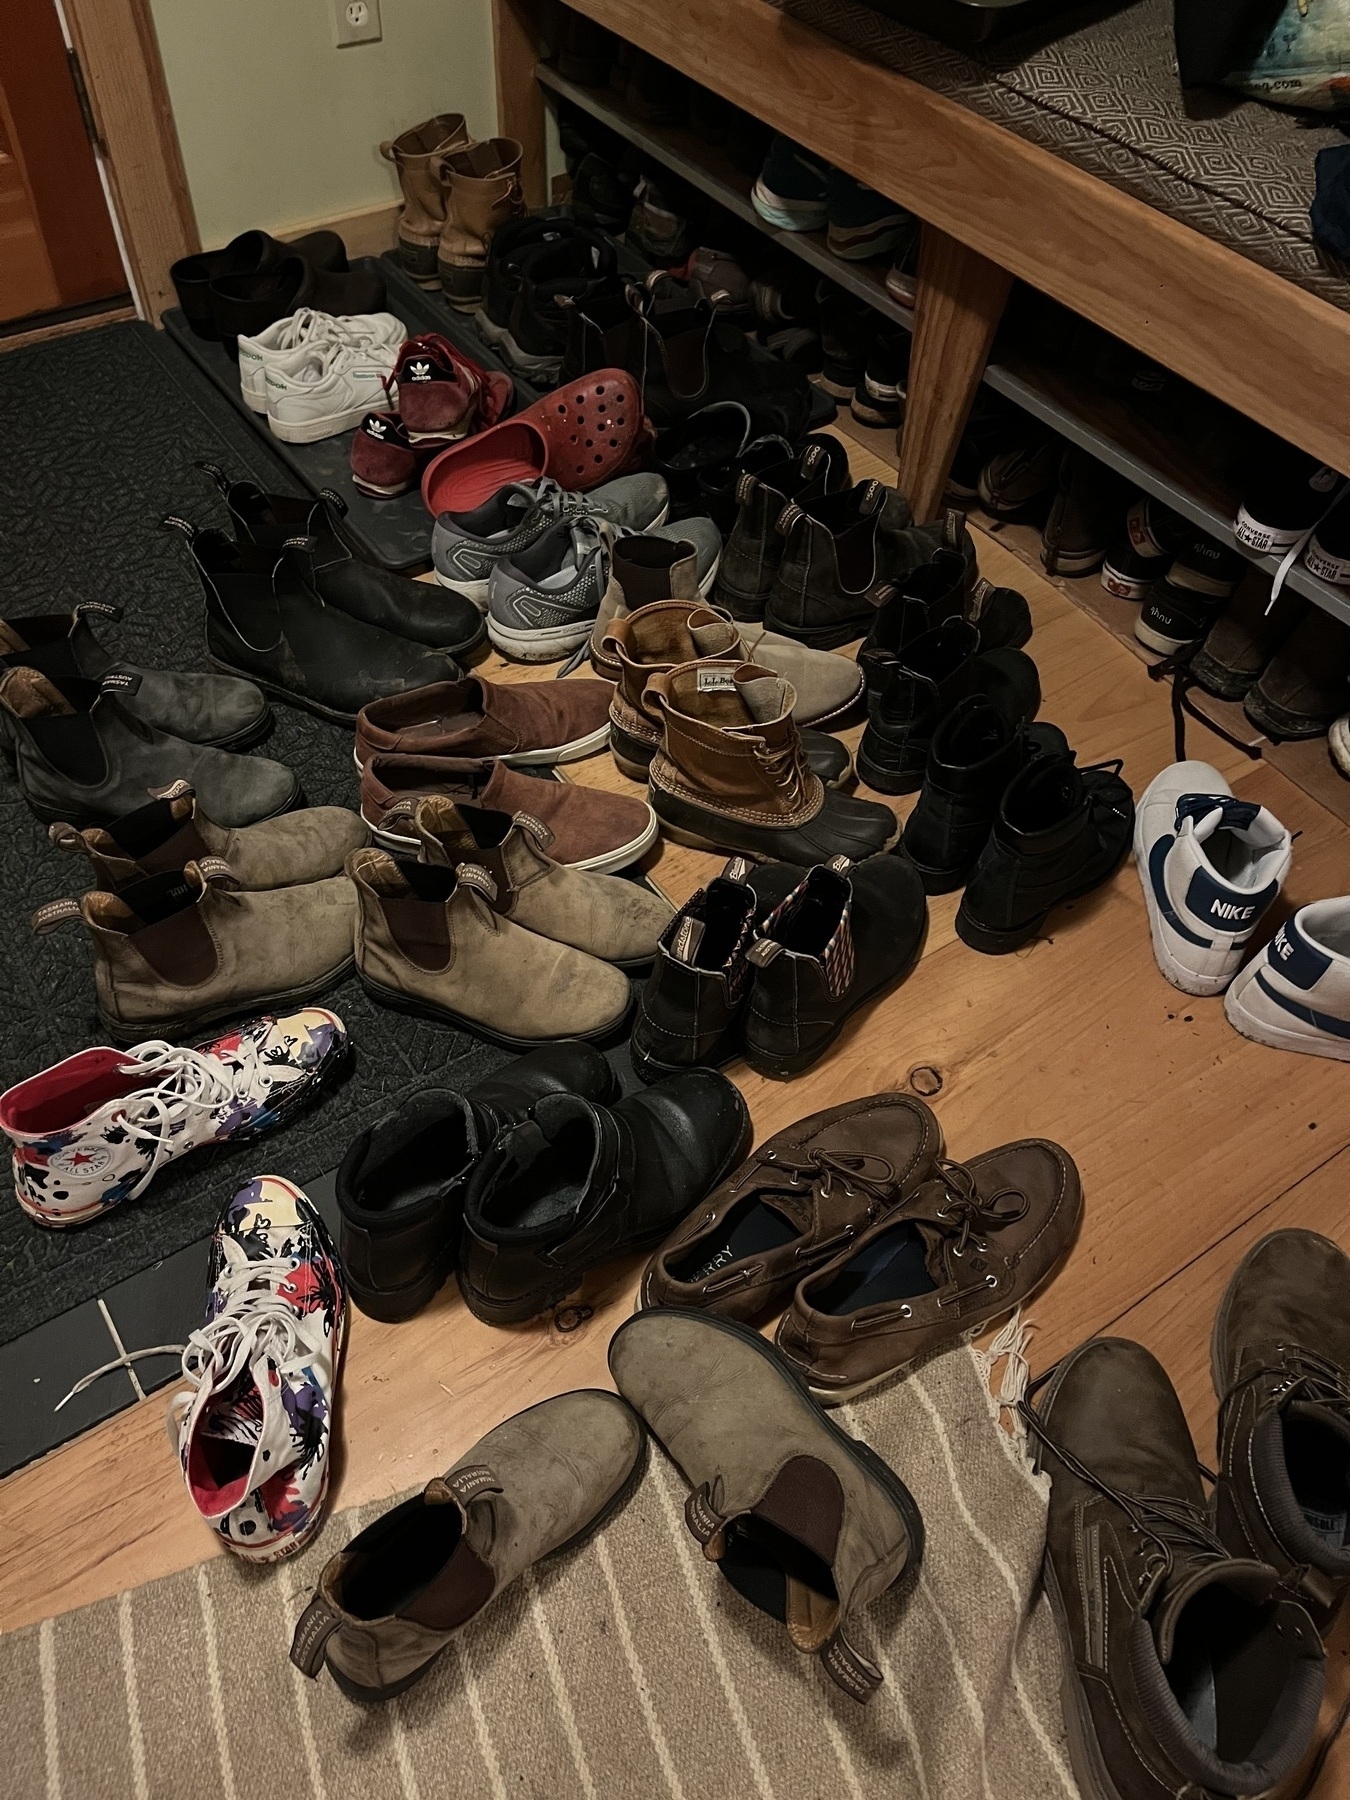 Floor covered in shoes